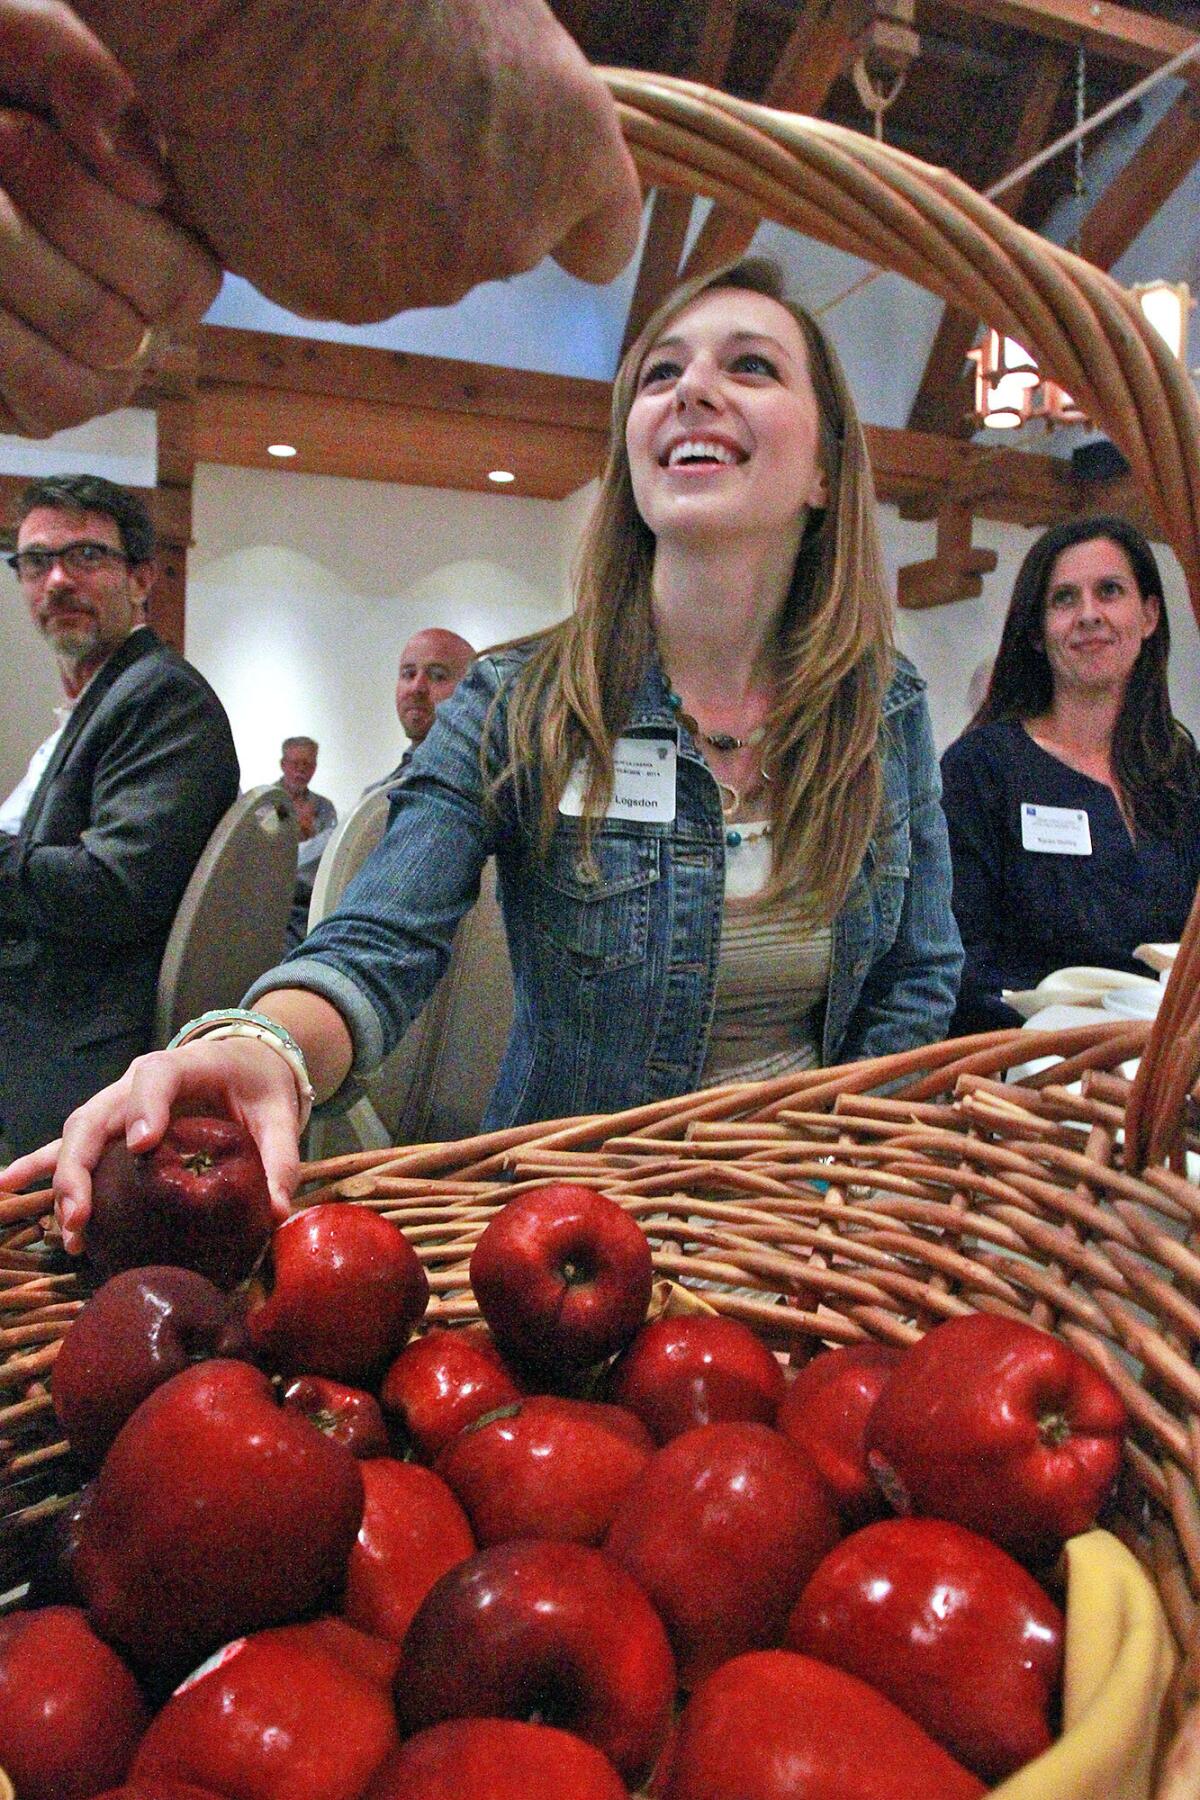 Alexis Logsdon, a new teacher at La Cañada Elementary School, picks a fresh red apple from a basket of apples at the Kiwanis Club of La Cañada Apple for a Teacher - 2014, at Descanso Gardens on Wednesday, August 6, 2014. New teachers at all the district's schools were introduced and offered an apple.